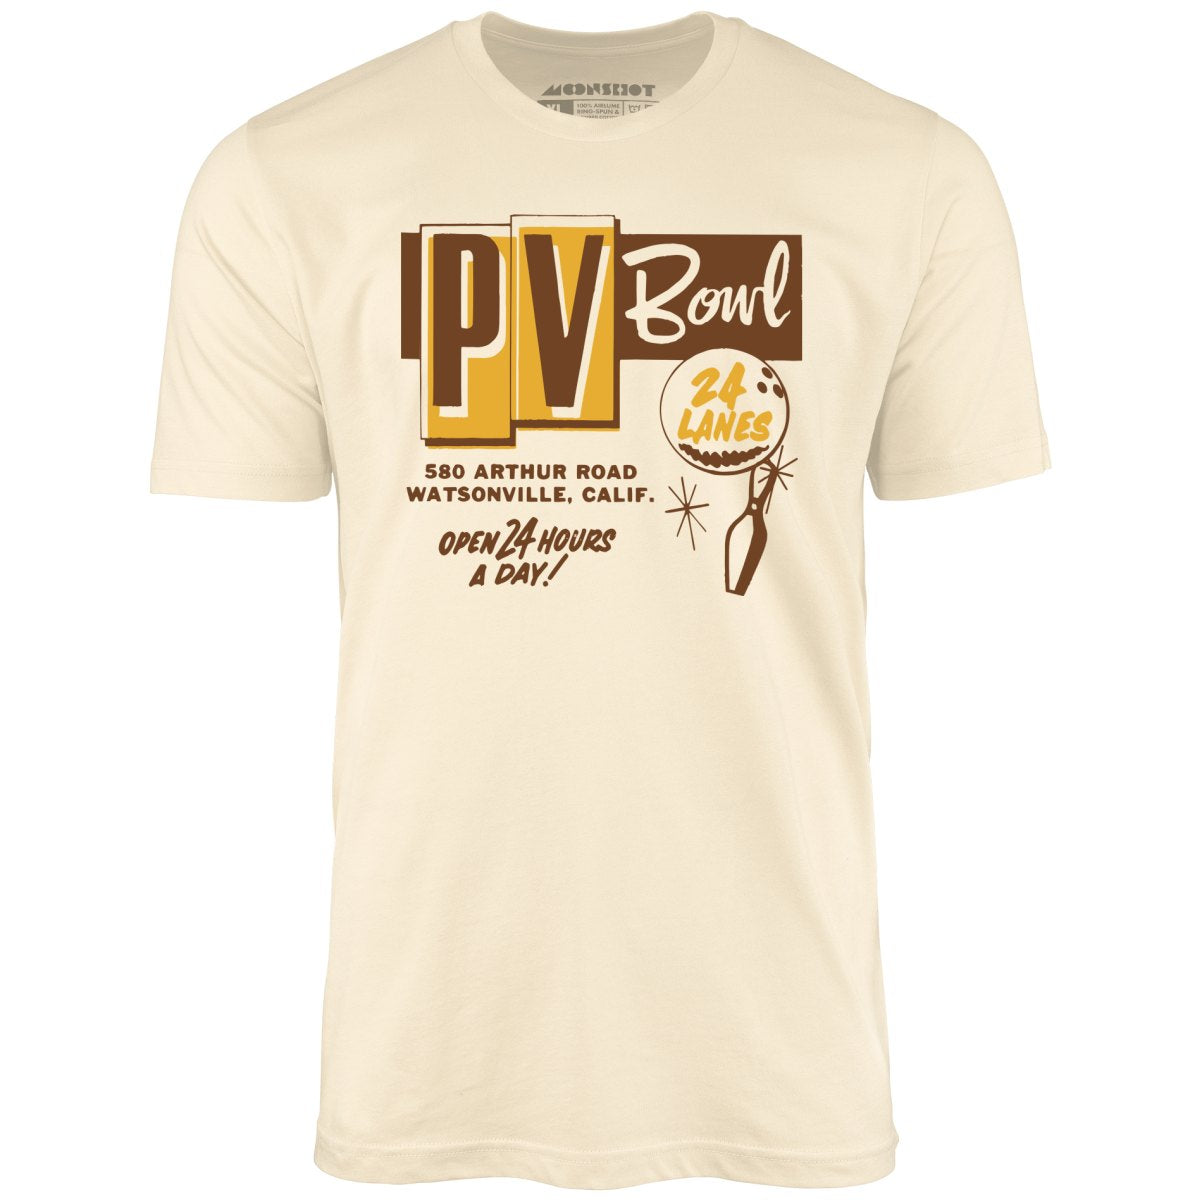 PV Bowl - Watsonville, CA - Vintage Bowling Alley - Unisex T-Shirt